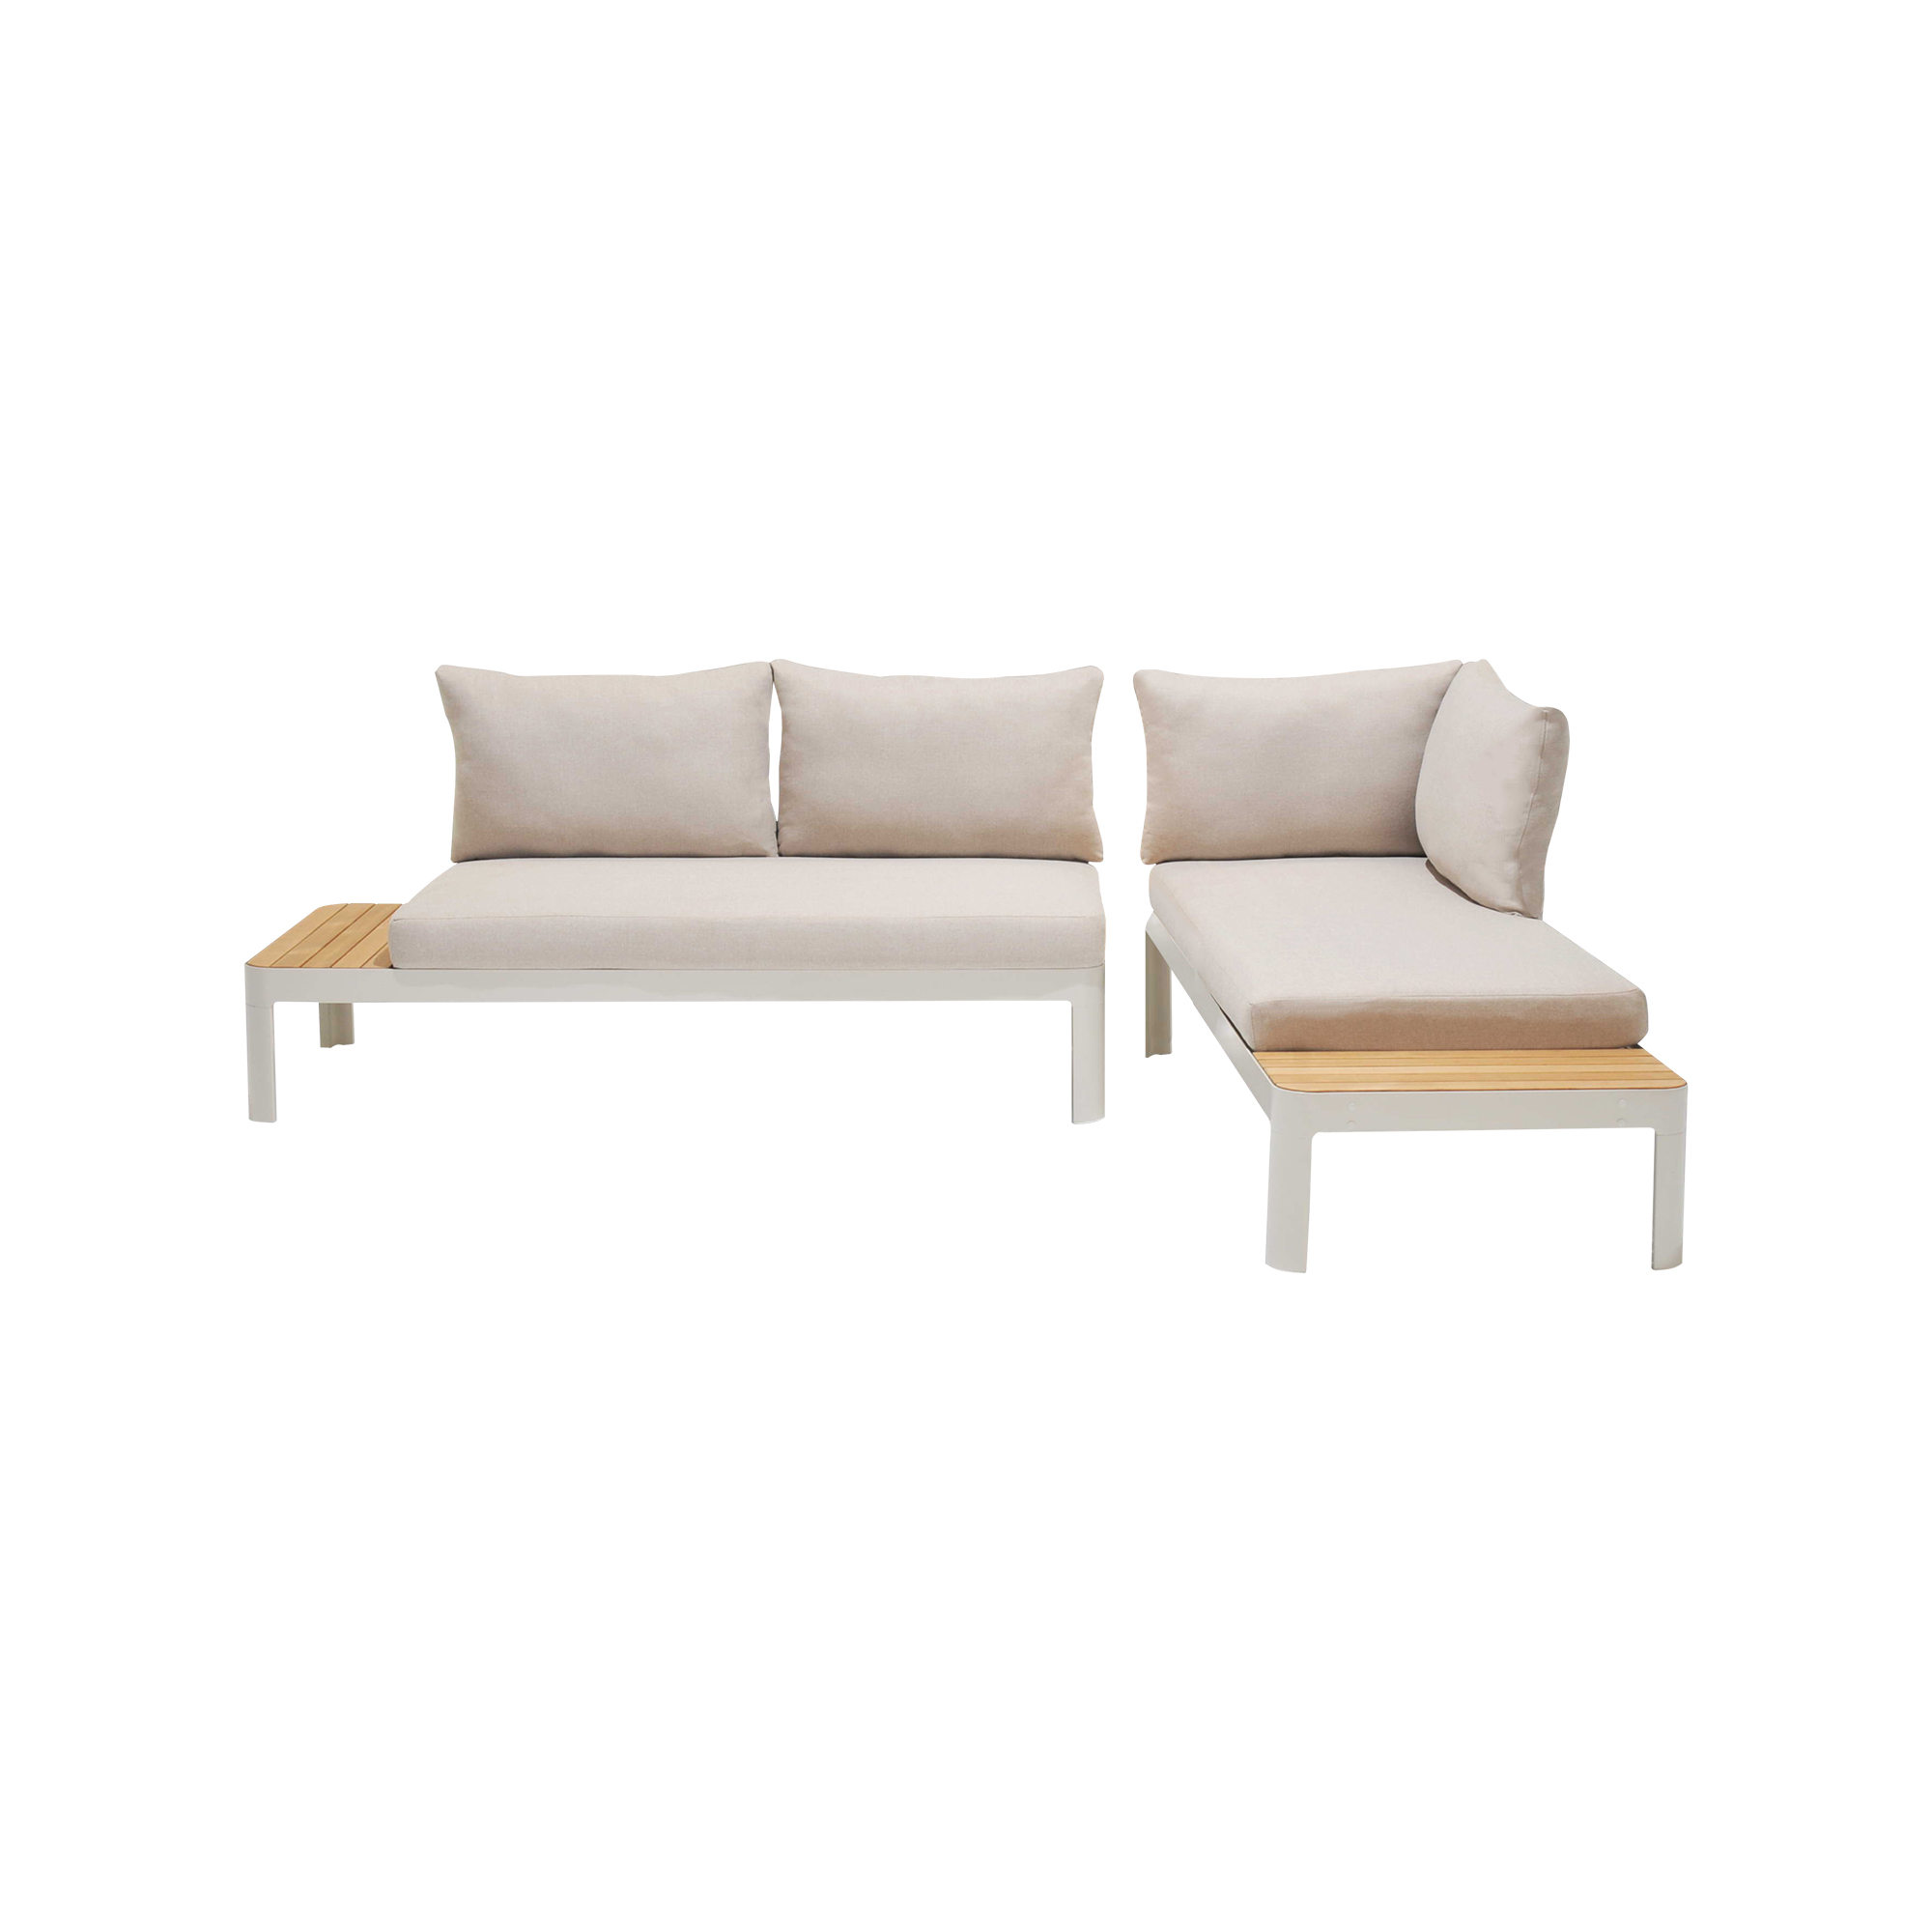 Portals Outdoor 2 Piece Sofa Set in Light Matte Sand Finish with Beige Cushions and Natural Teak Wood Accent - image 1 of 6